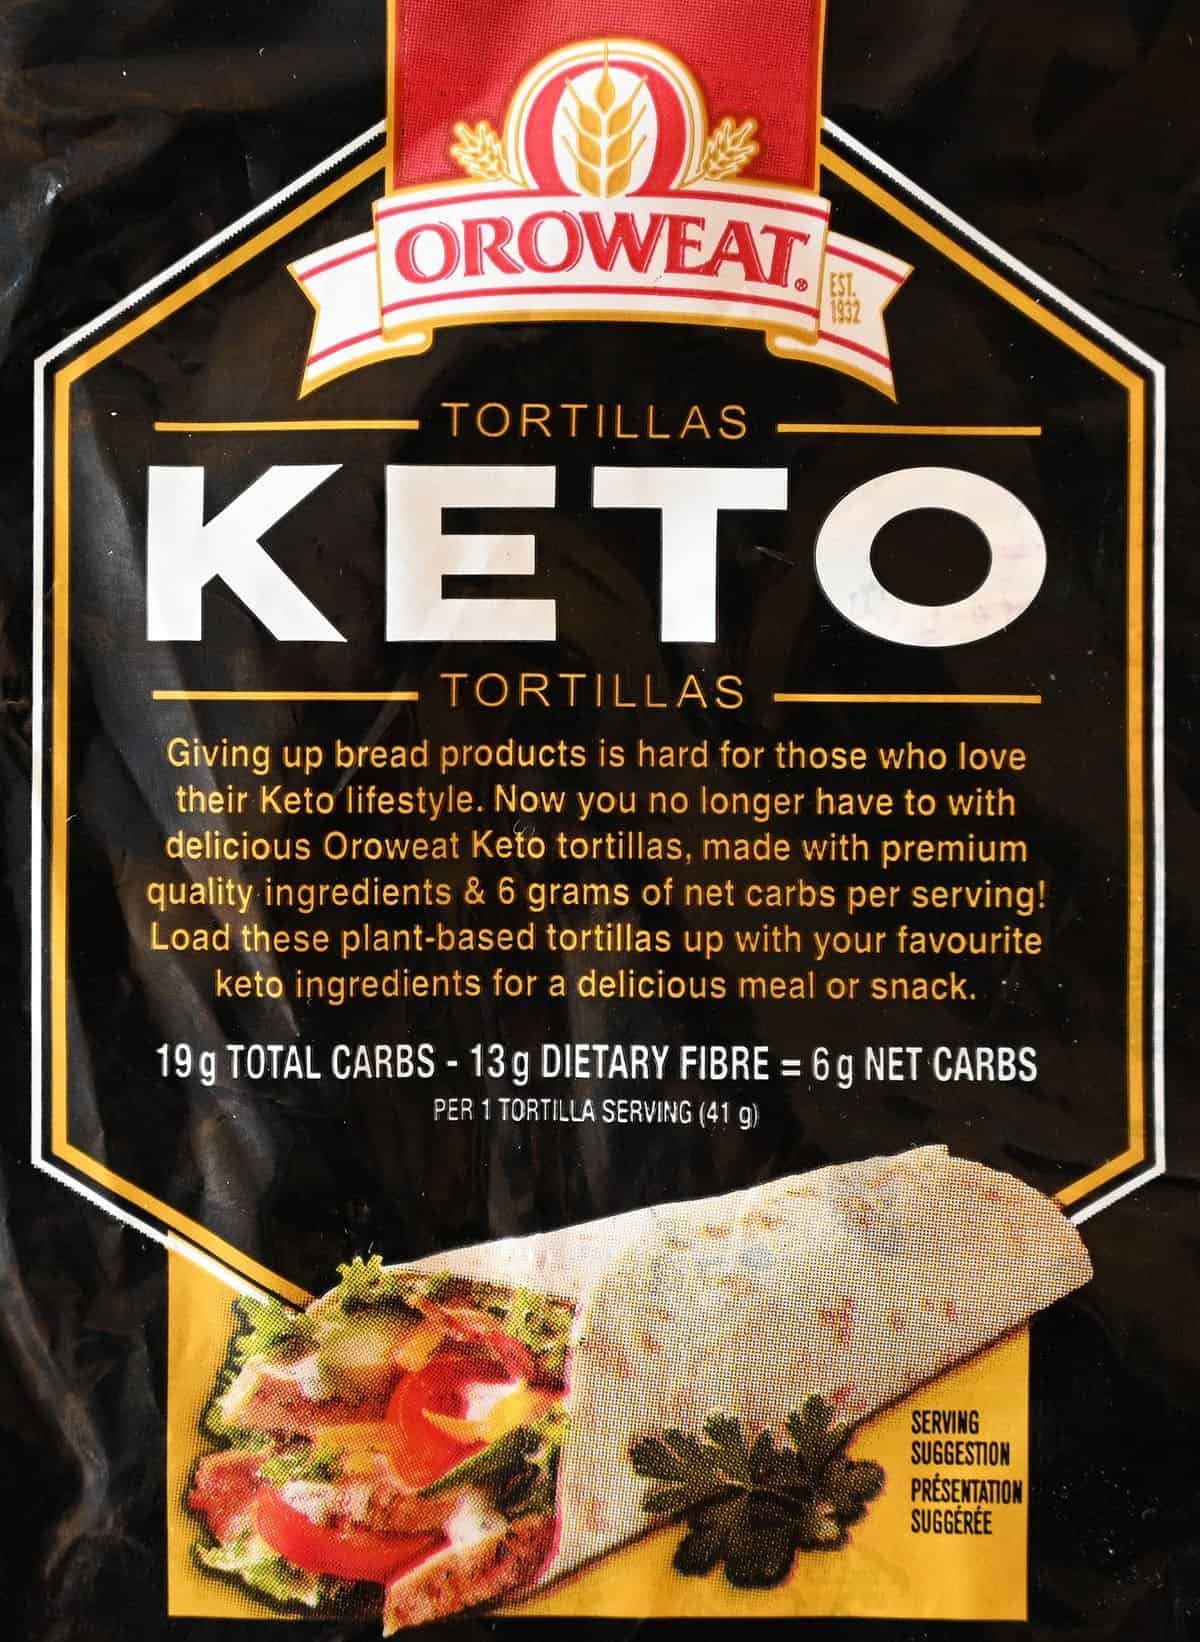 Costco Orowheat Keto Tortillas product description from the back of the bag. 